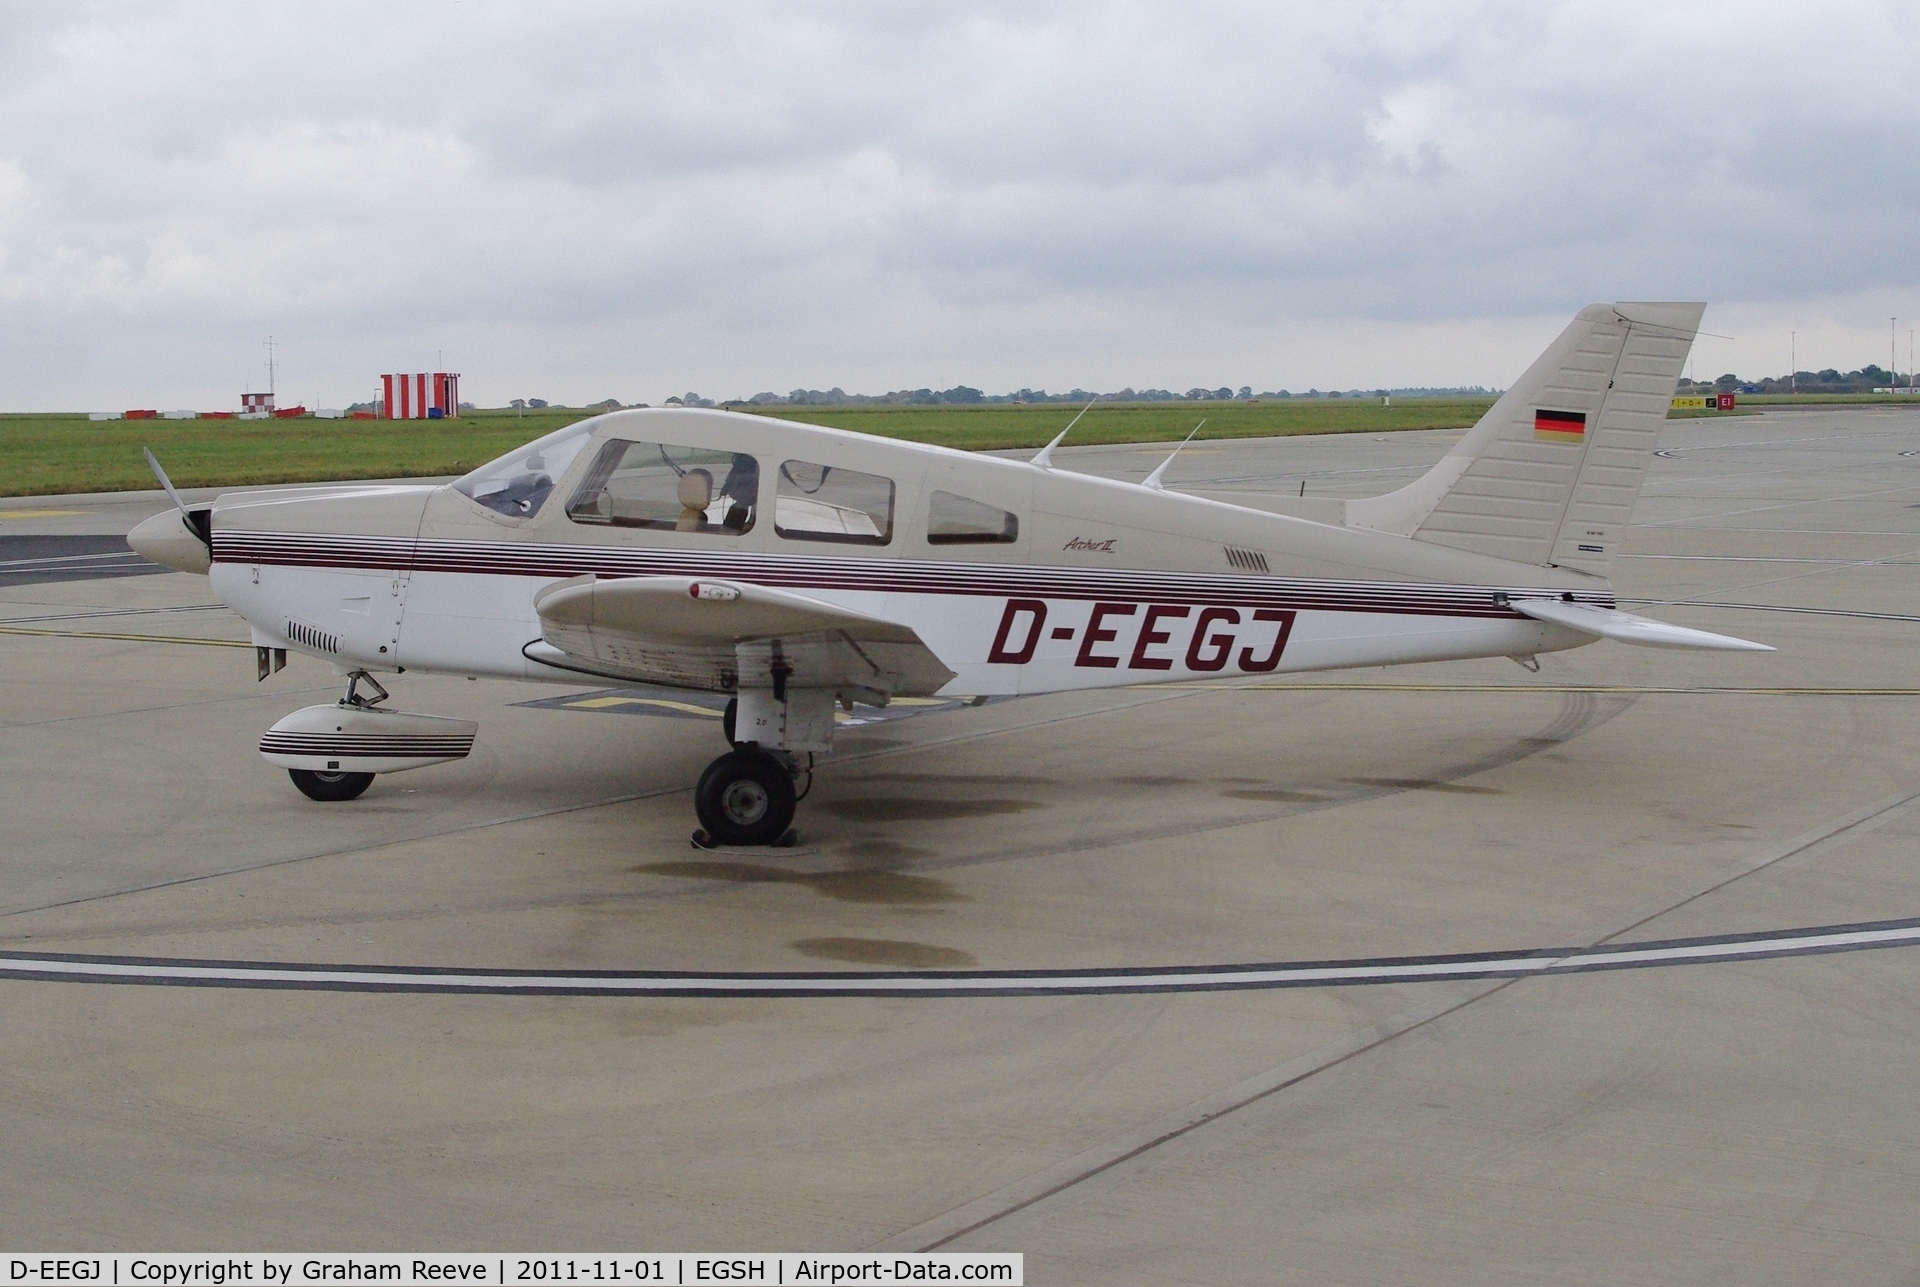 D-EEGJ, Piper PA-28-181 C/N 2890066, Parked at Norwich.